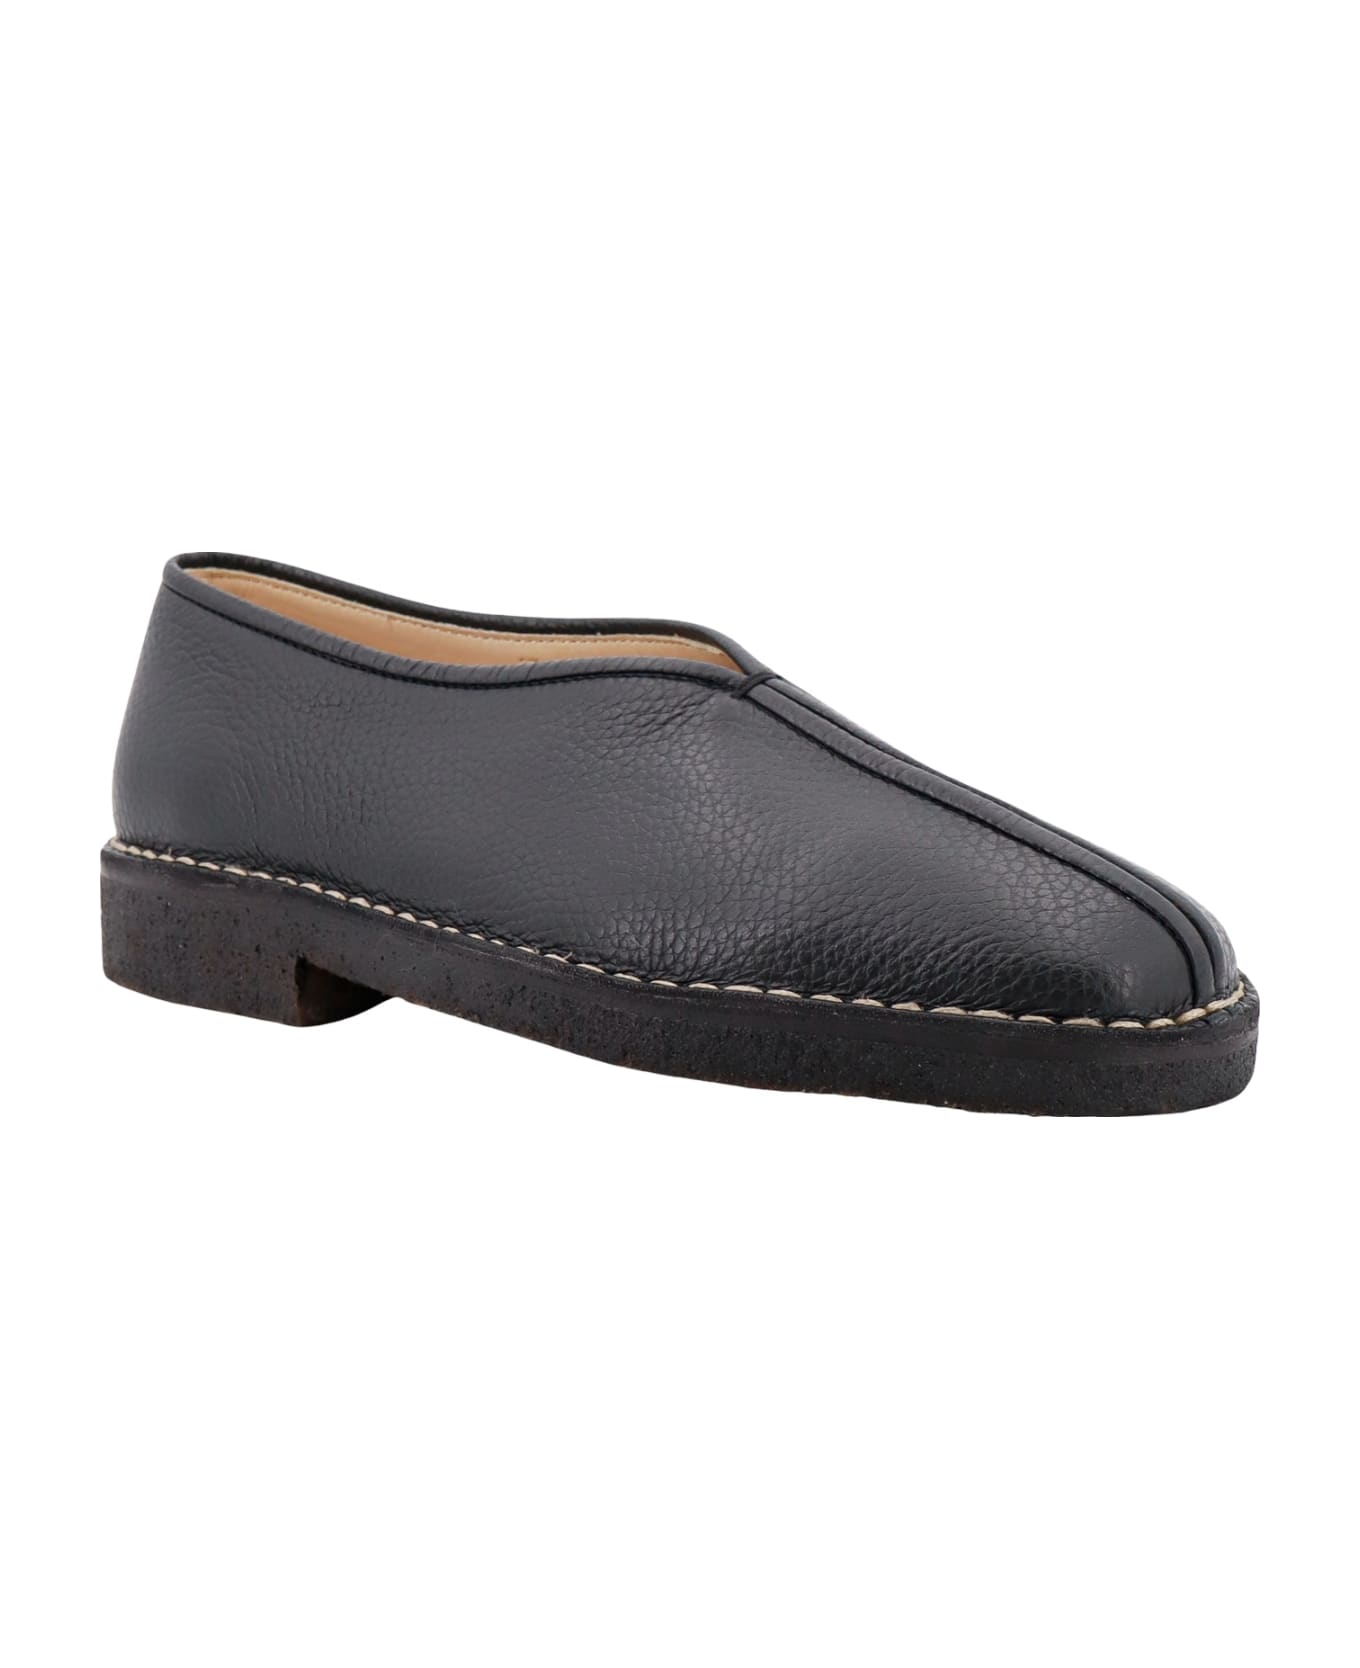 Lemaire Slippers - Black